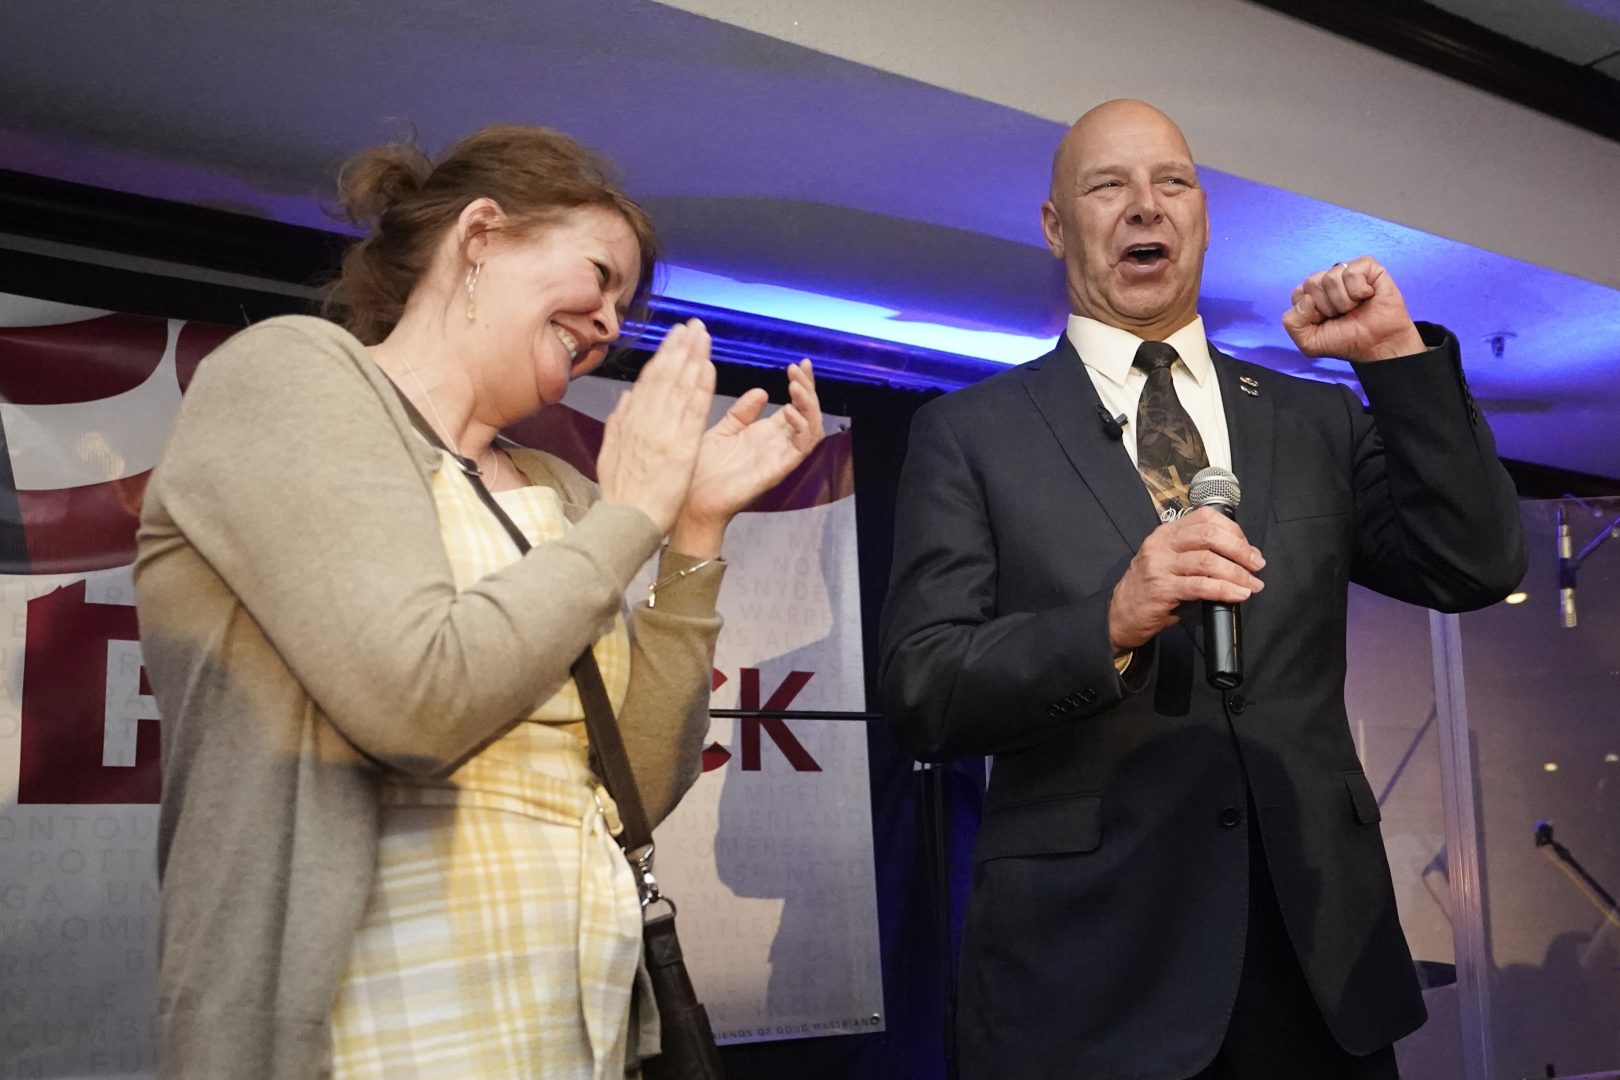 State Sen. Doug Mastriano, R-Franklin, a Republican candidate for Pennsylvania governor, gestures as he speaks at a primary night election gathering in Chambersburg, Pa., Tuesday, May 17, 2022, with his wife, Rebbeca.